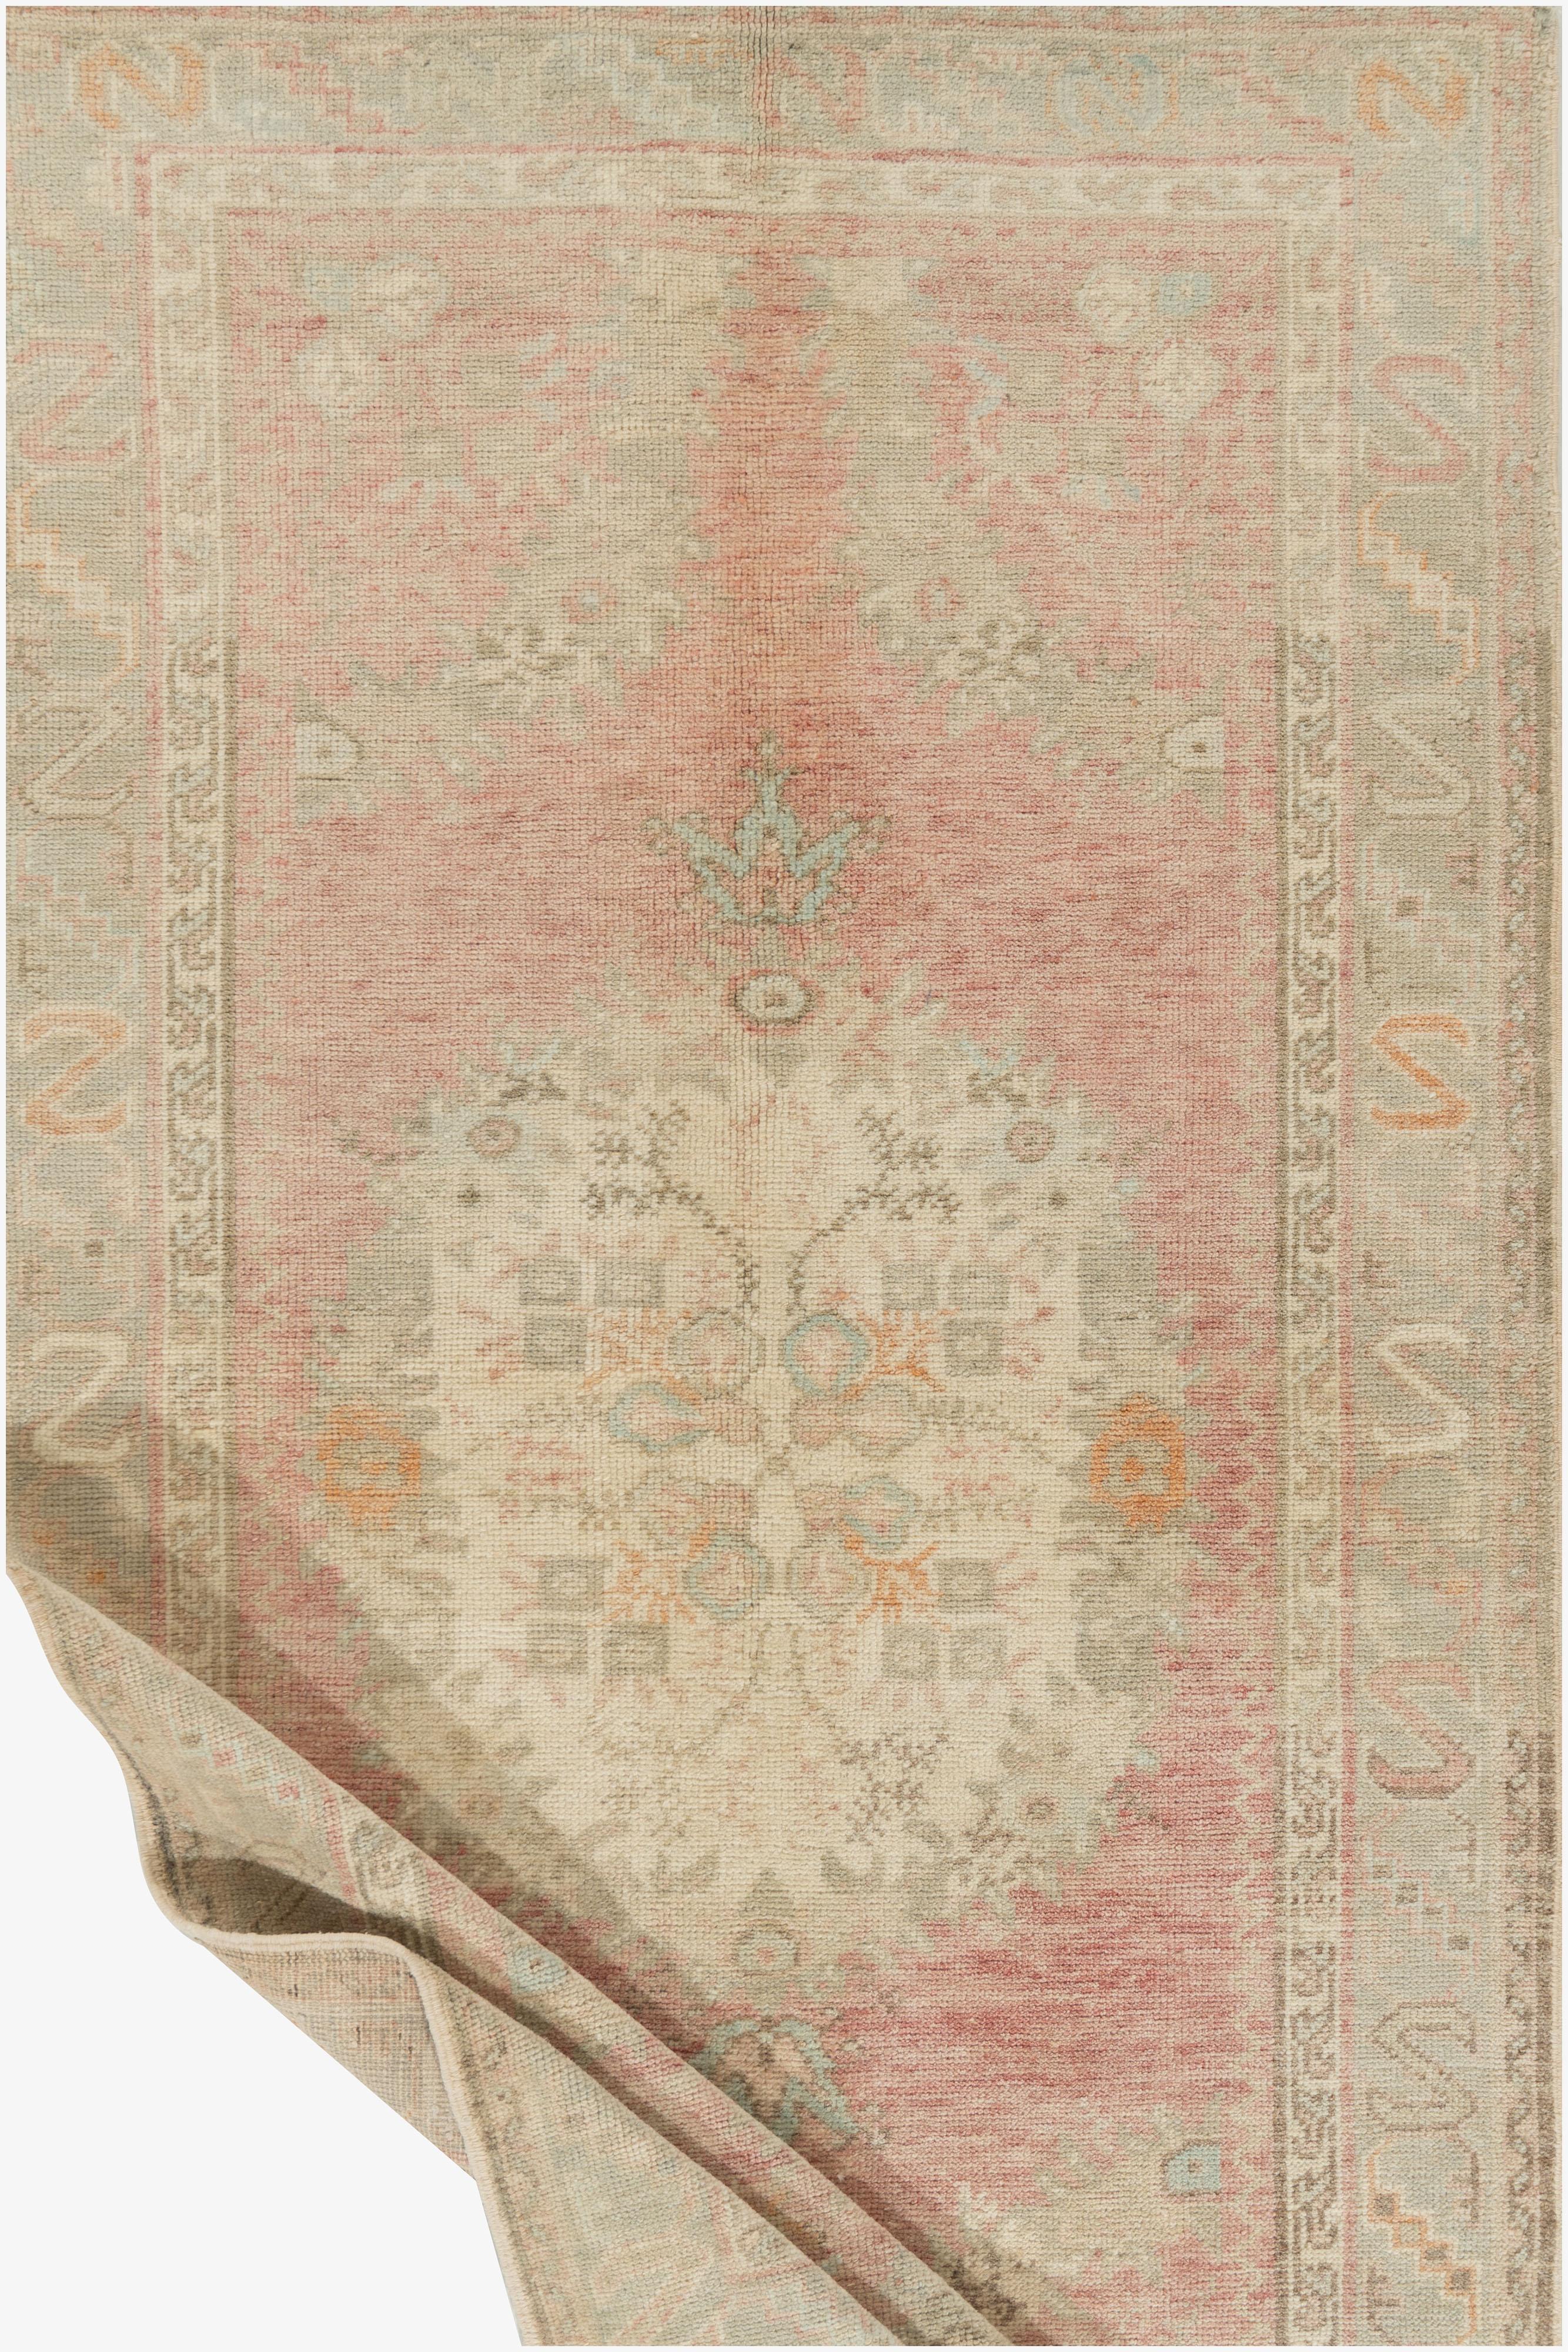 Vintage Turkish Oushak Area Rug 3'4 X 5'1. The luxurious quality of the wool (for which Oushaks have always been famous) contributed to the vibrancy of the colors. Unlike most Turkish rugs, Oushak rugs were heavily influenced by Persian design. Many